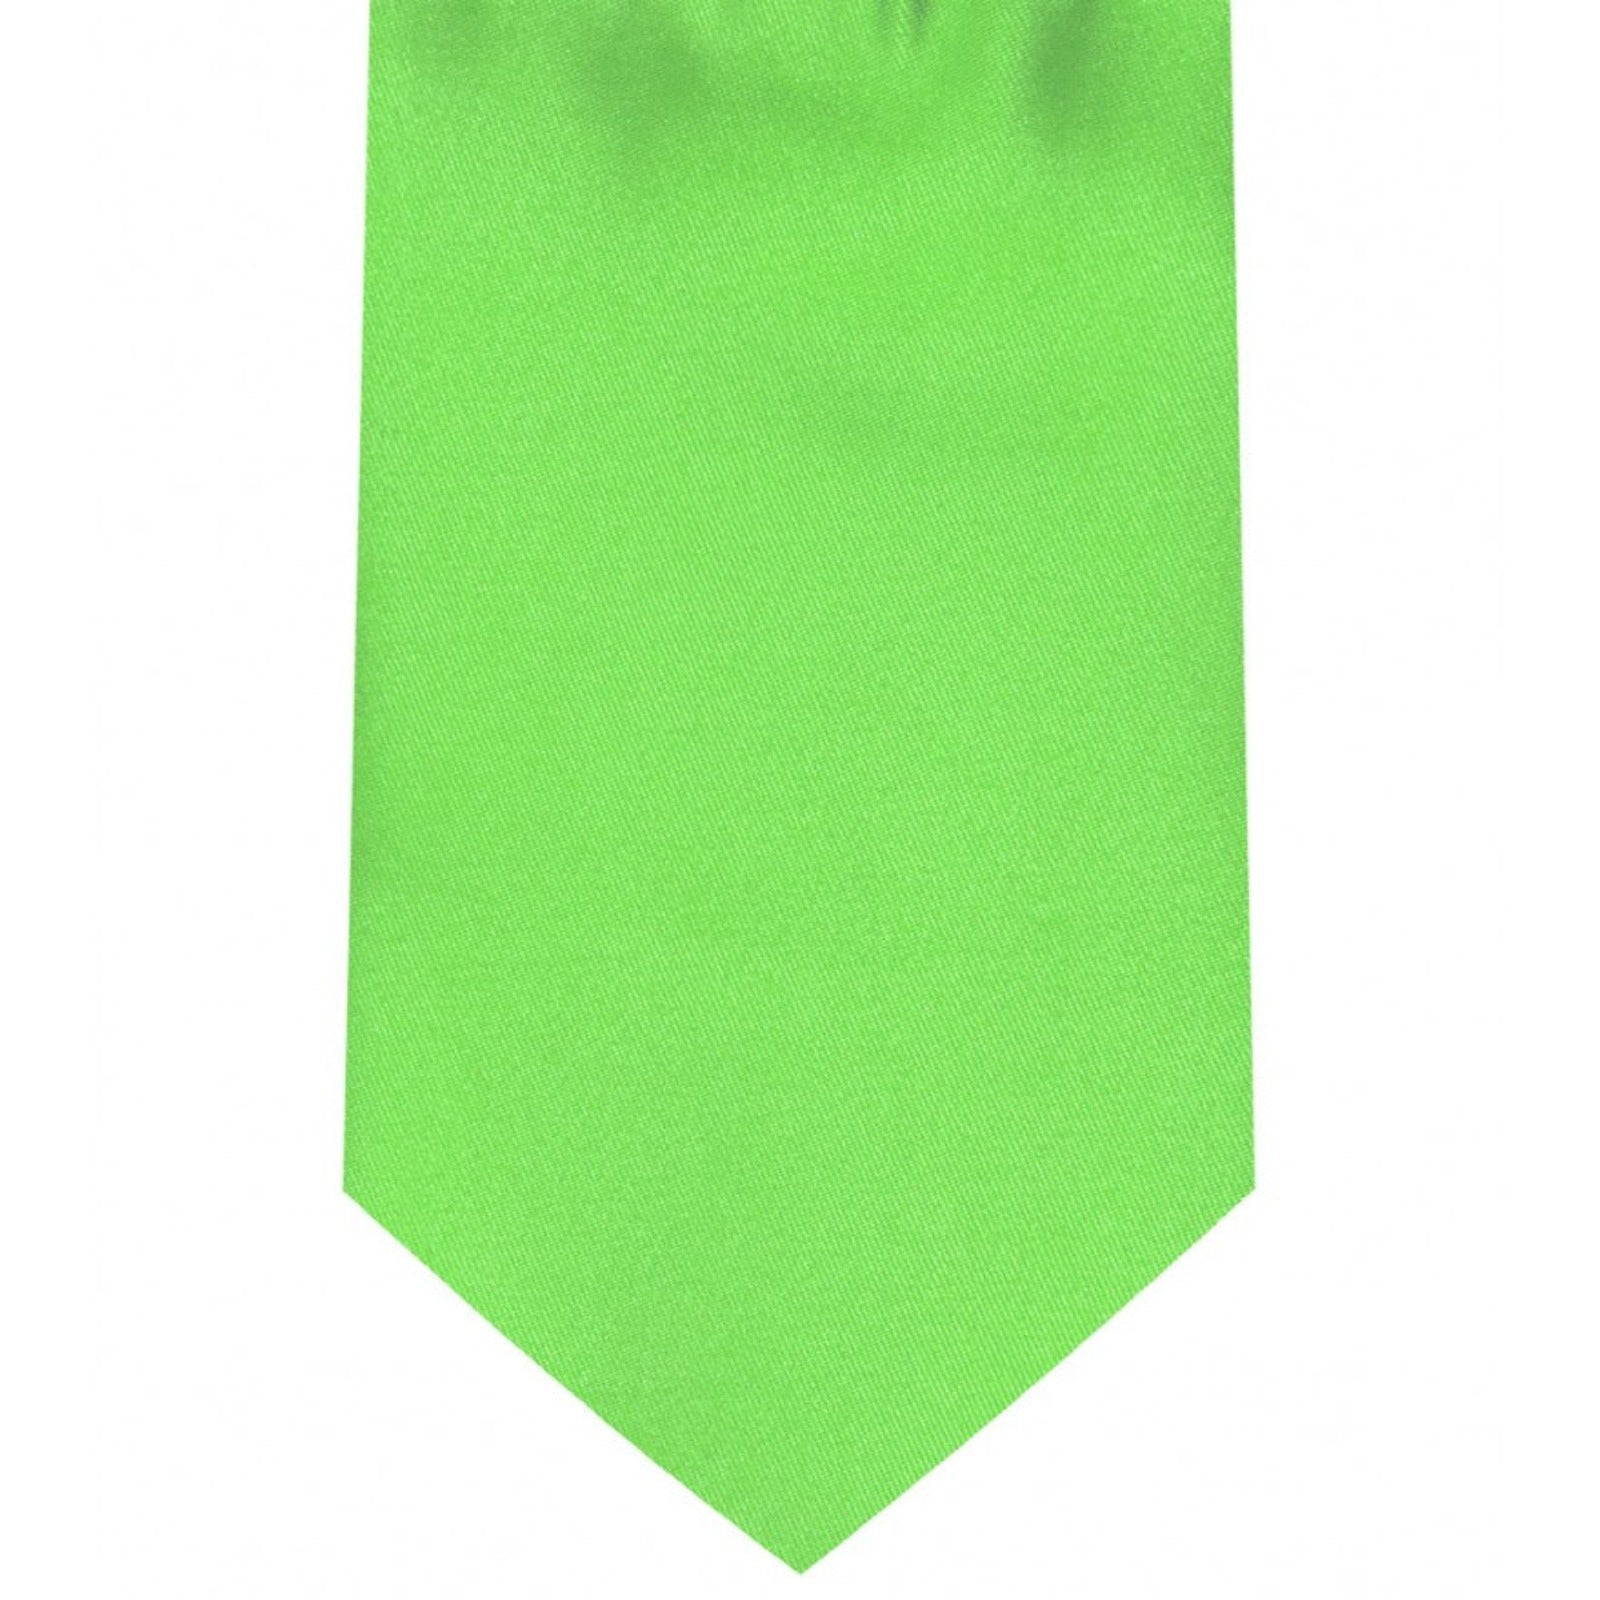 Classic Lettuce Green Tie Regular width 3.5 inches With Matching Pocket Square | KCT Menswear 